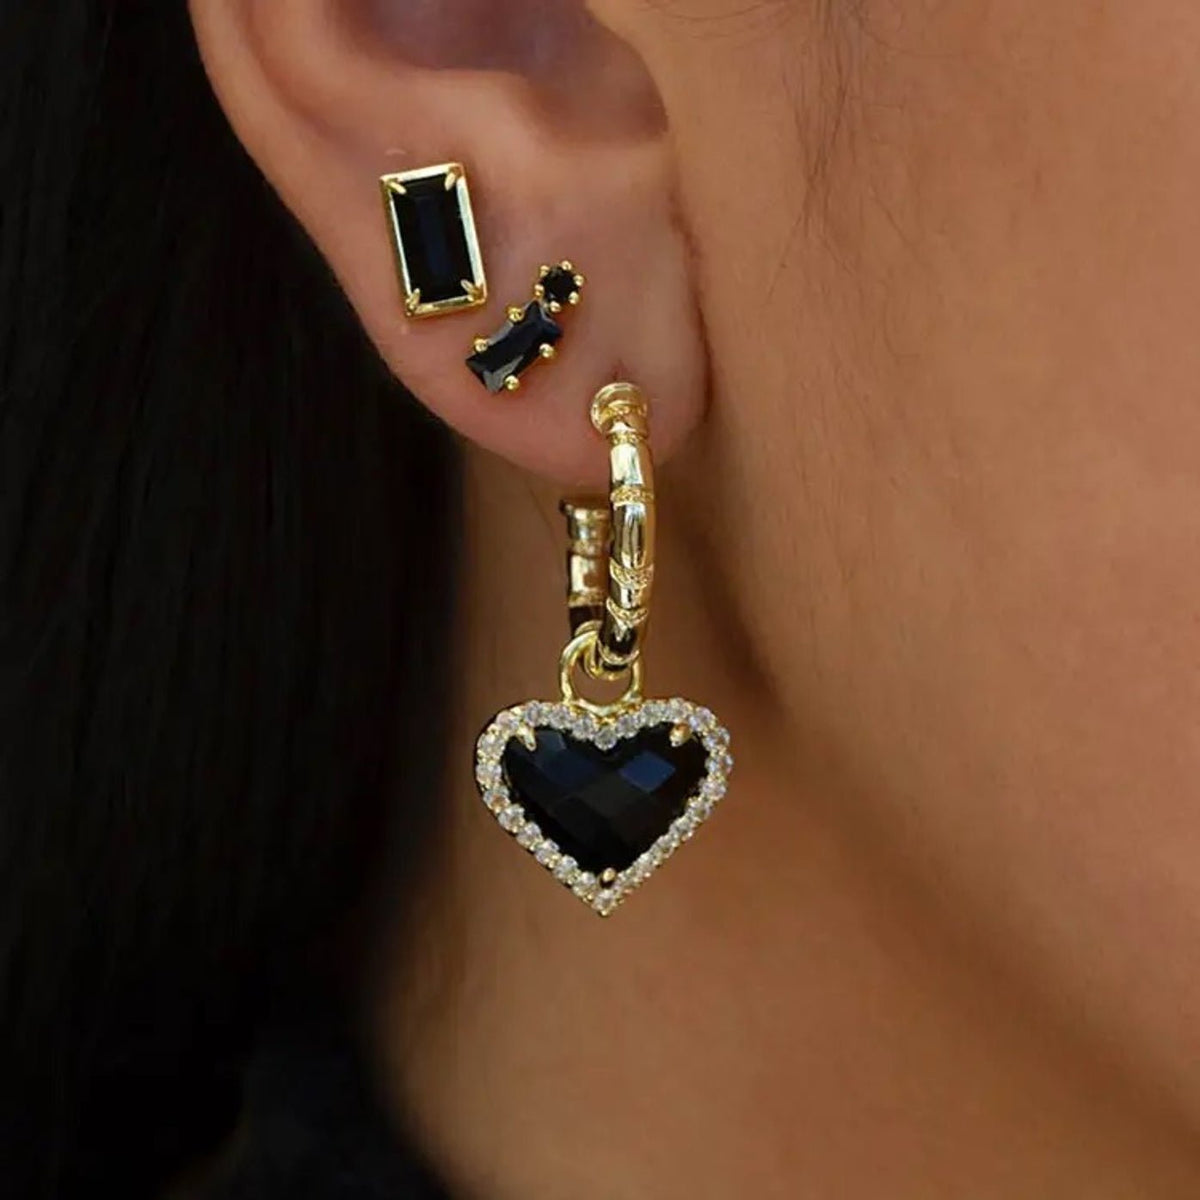 black heart 18k gold plated earrings may-i reliquia fandh frankly my dear